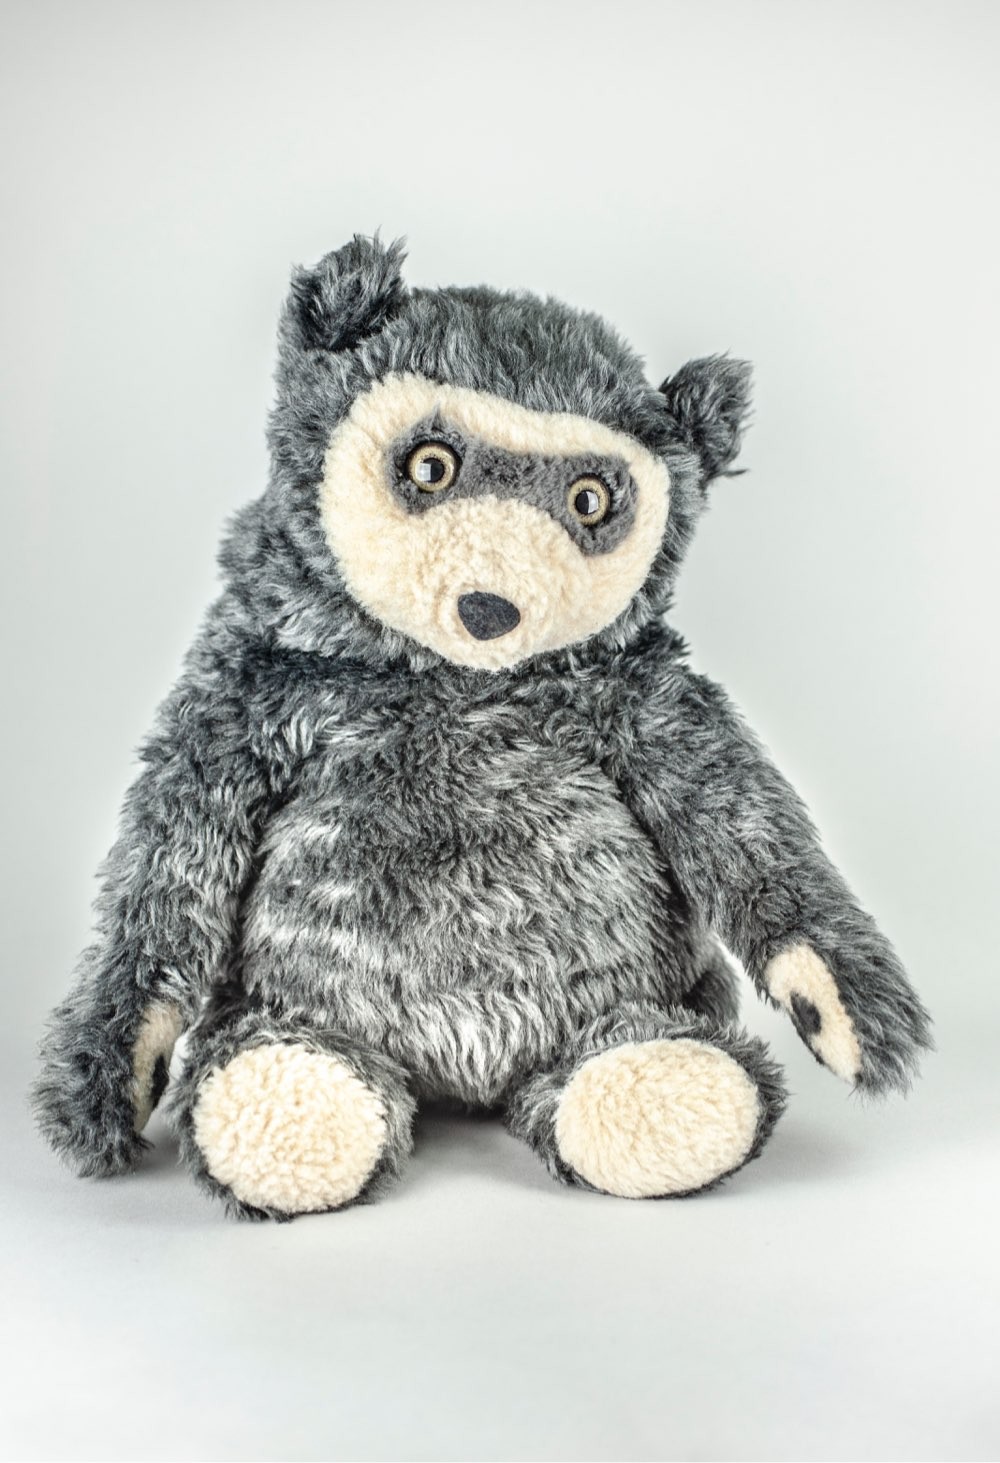 The photo shows the Bo Bear soft toy also designed by PISTO.